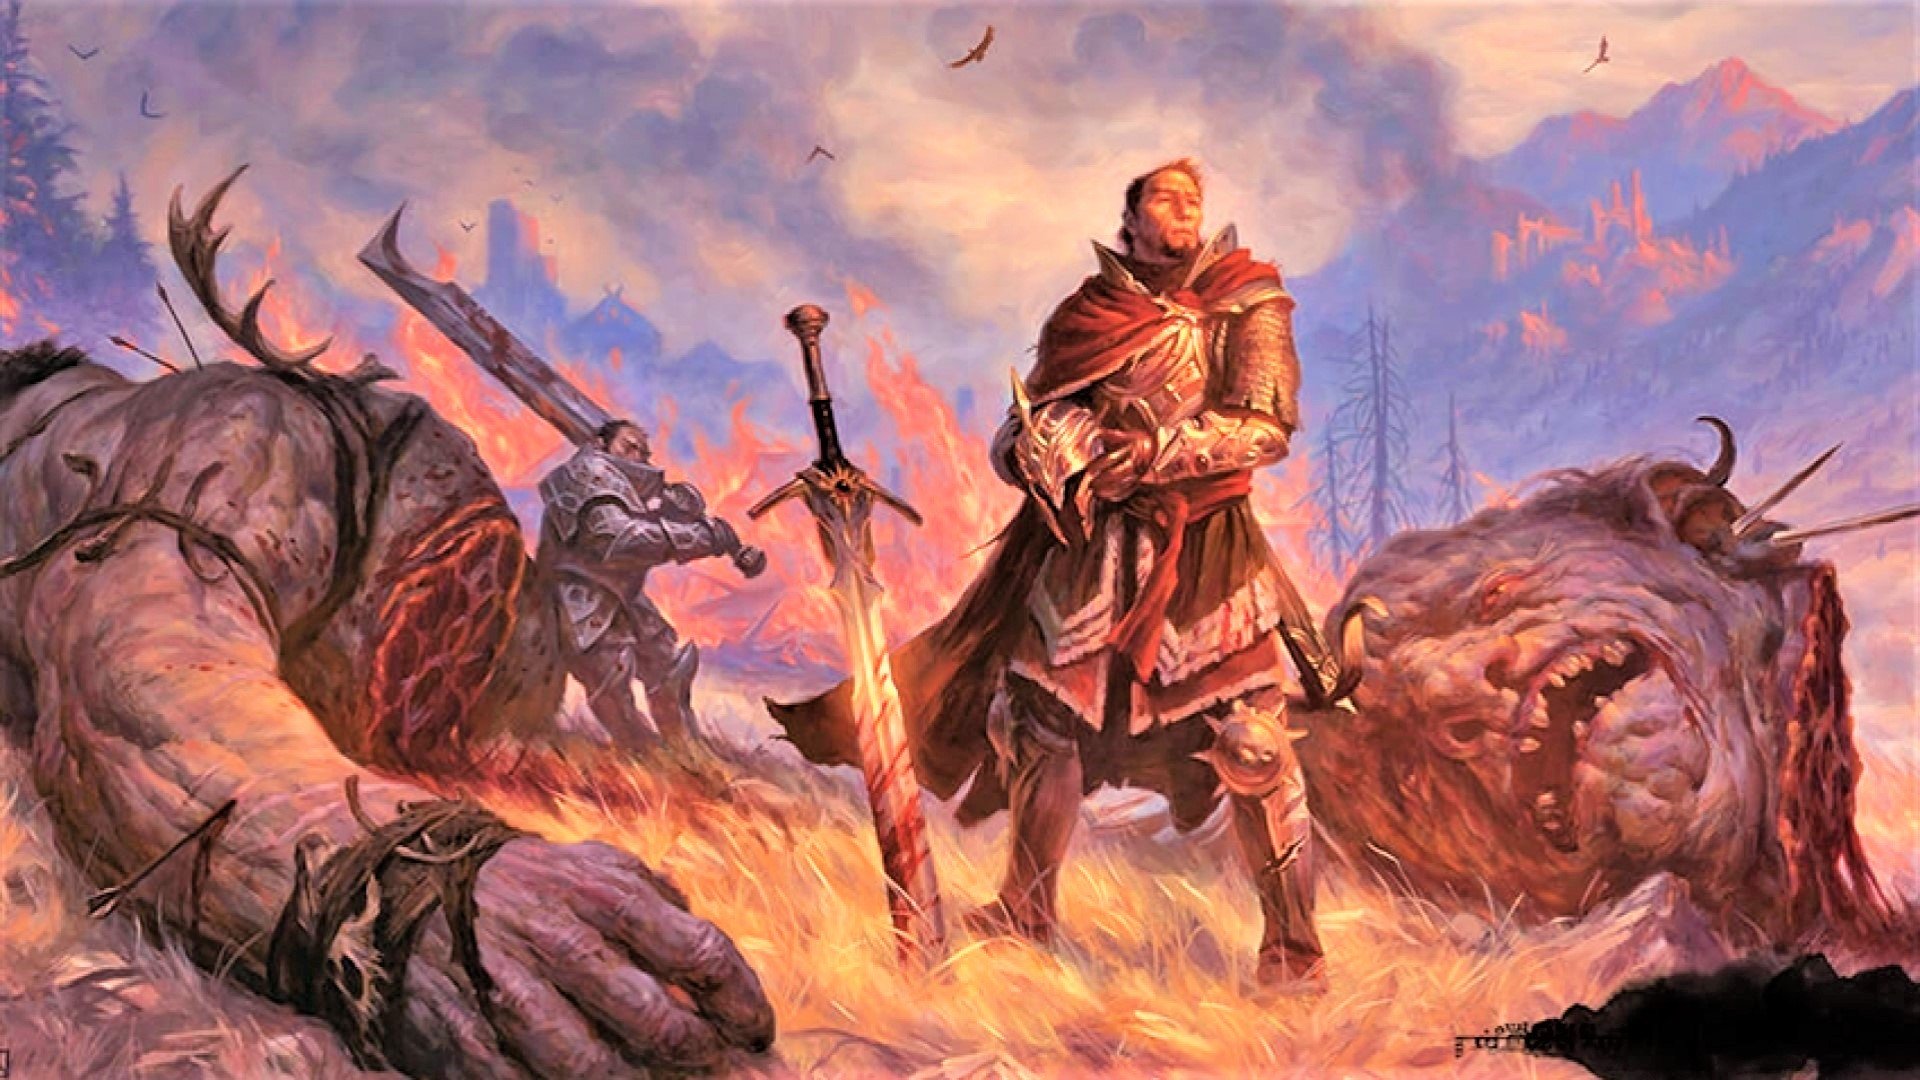 DnD Cleric 5E - Wizards of the Coast artwork showing a human character in heavy armour, with a greatsword, and a dead giant